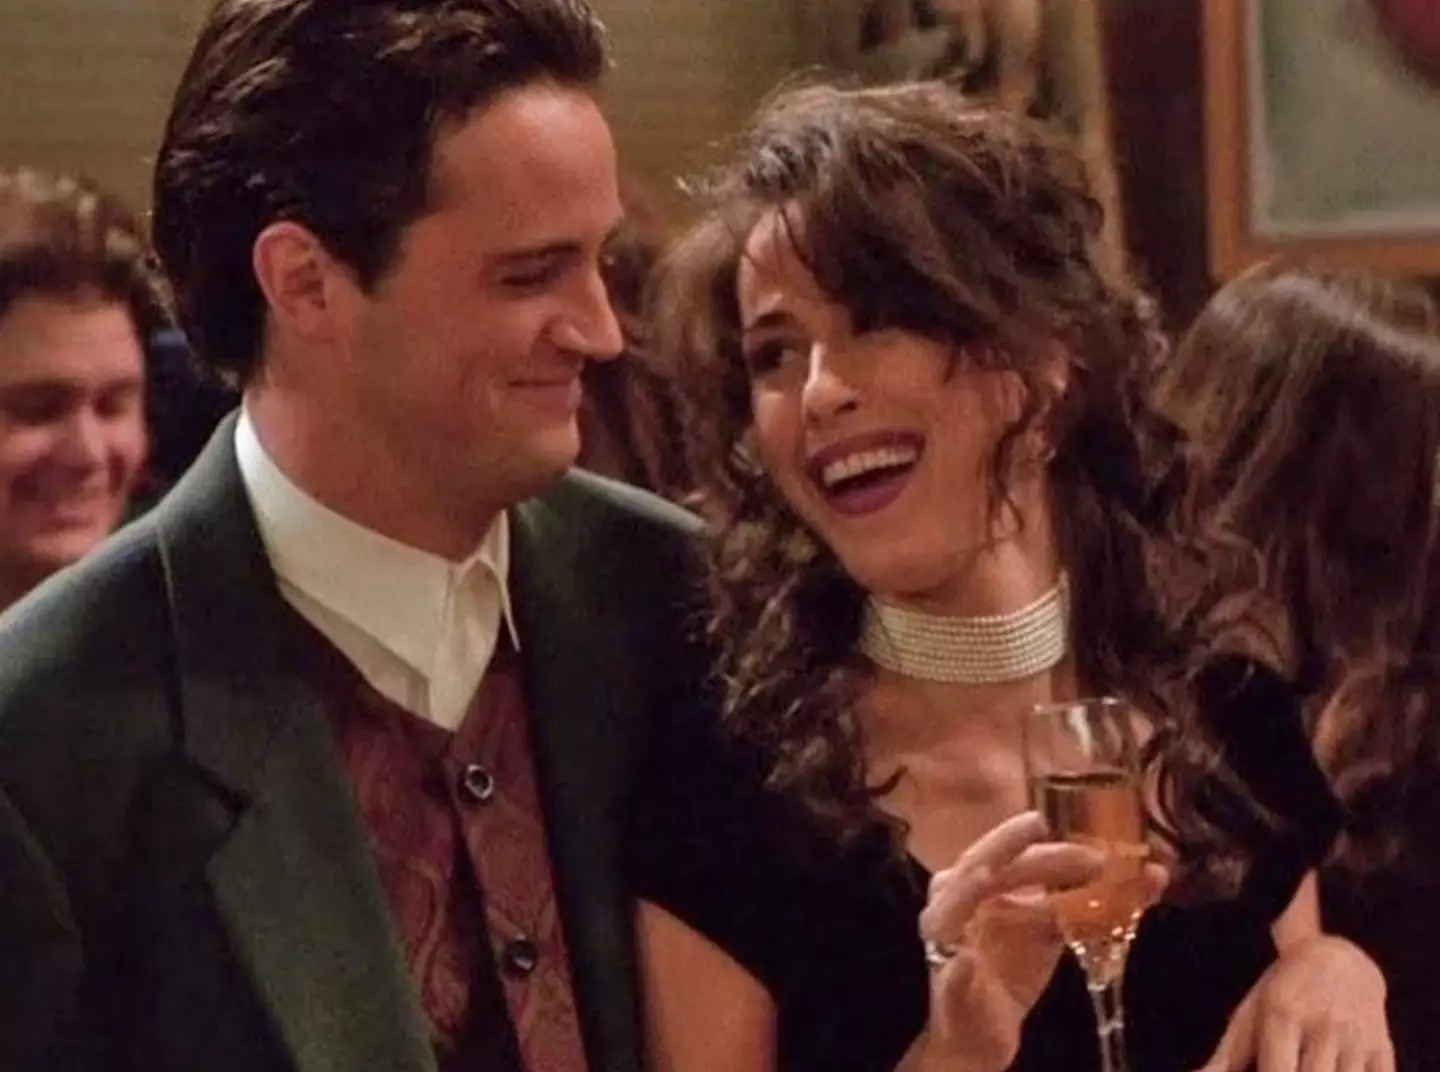 Maggie Wheeler, who played Janice in hit sitcom Friends, has paid tribute to Matthew Perry.